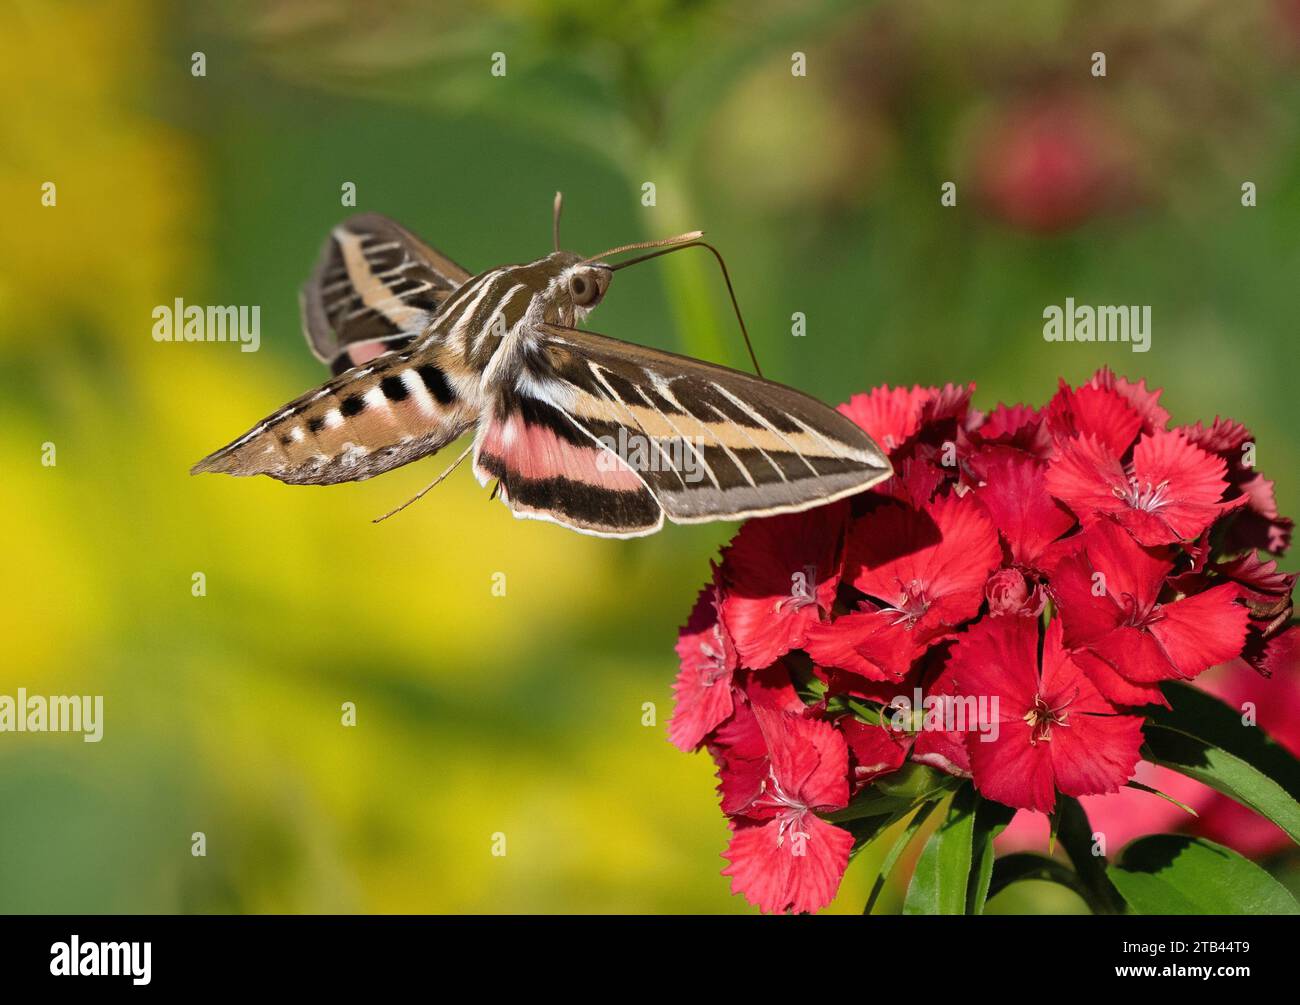 A White-lined Sphinx Moth pollinating a colorful Sweet William flower. Close up view. Stock Photo